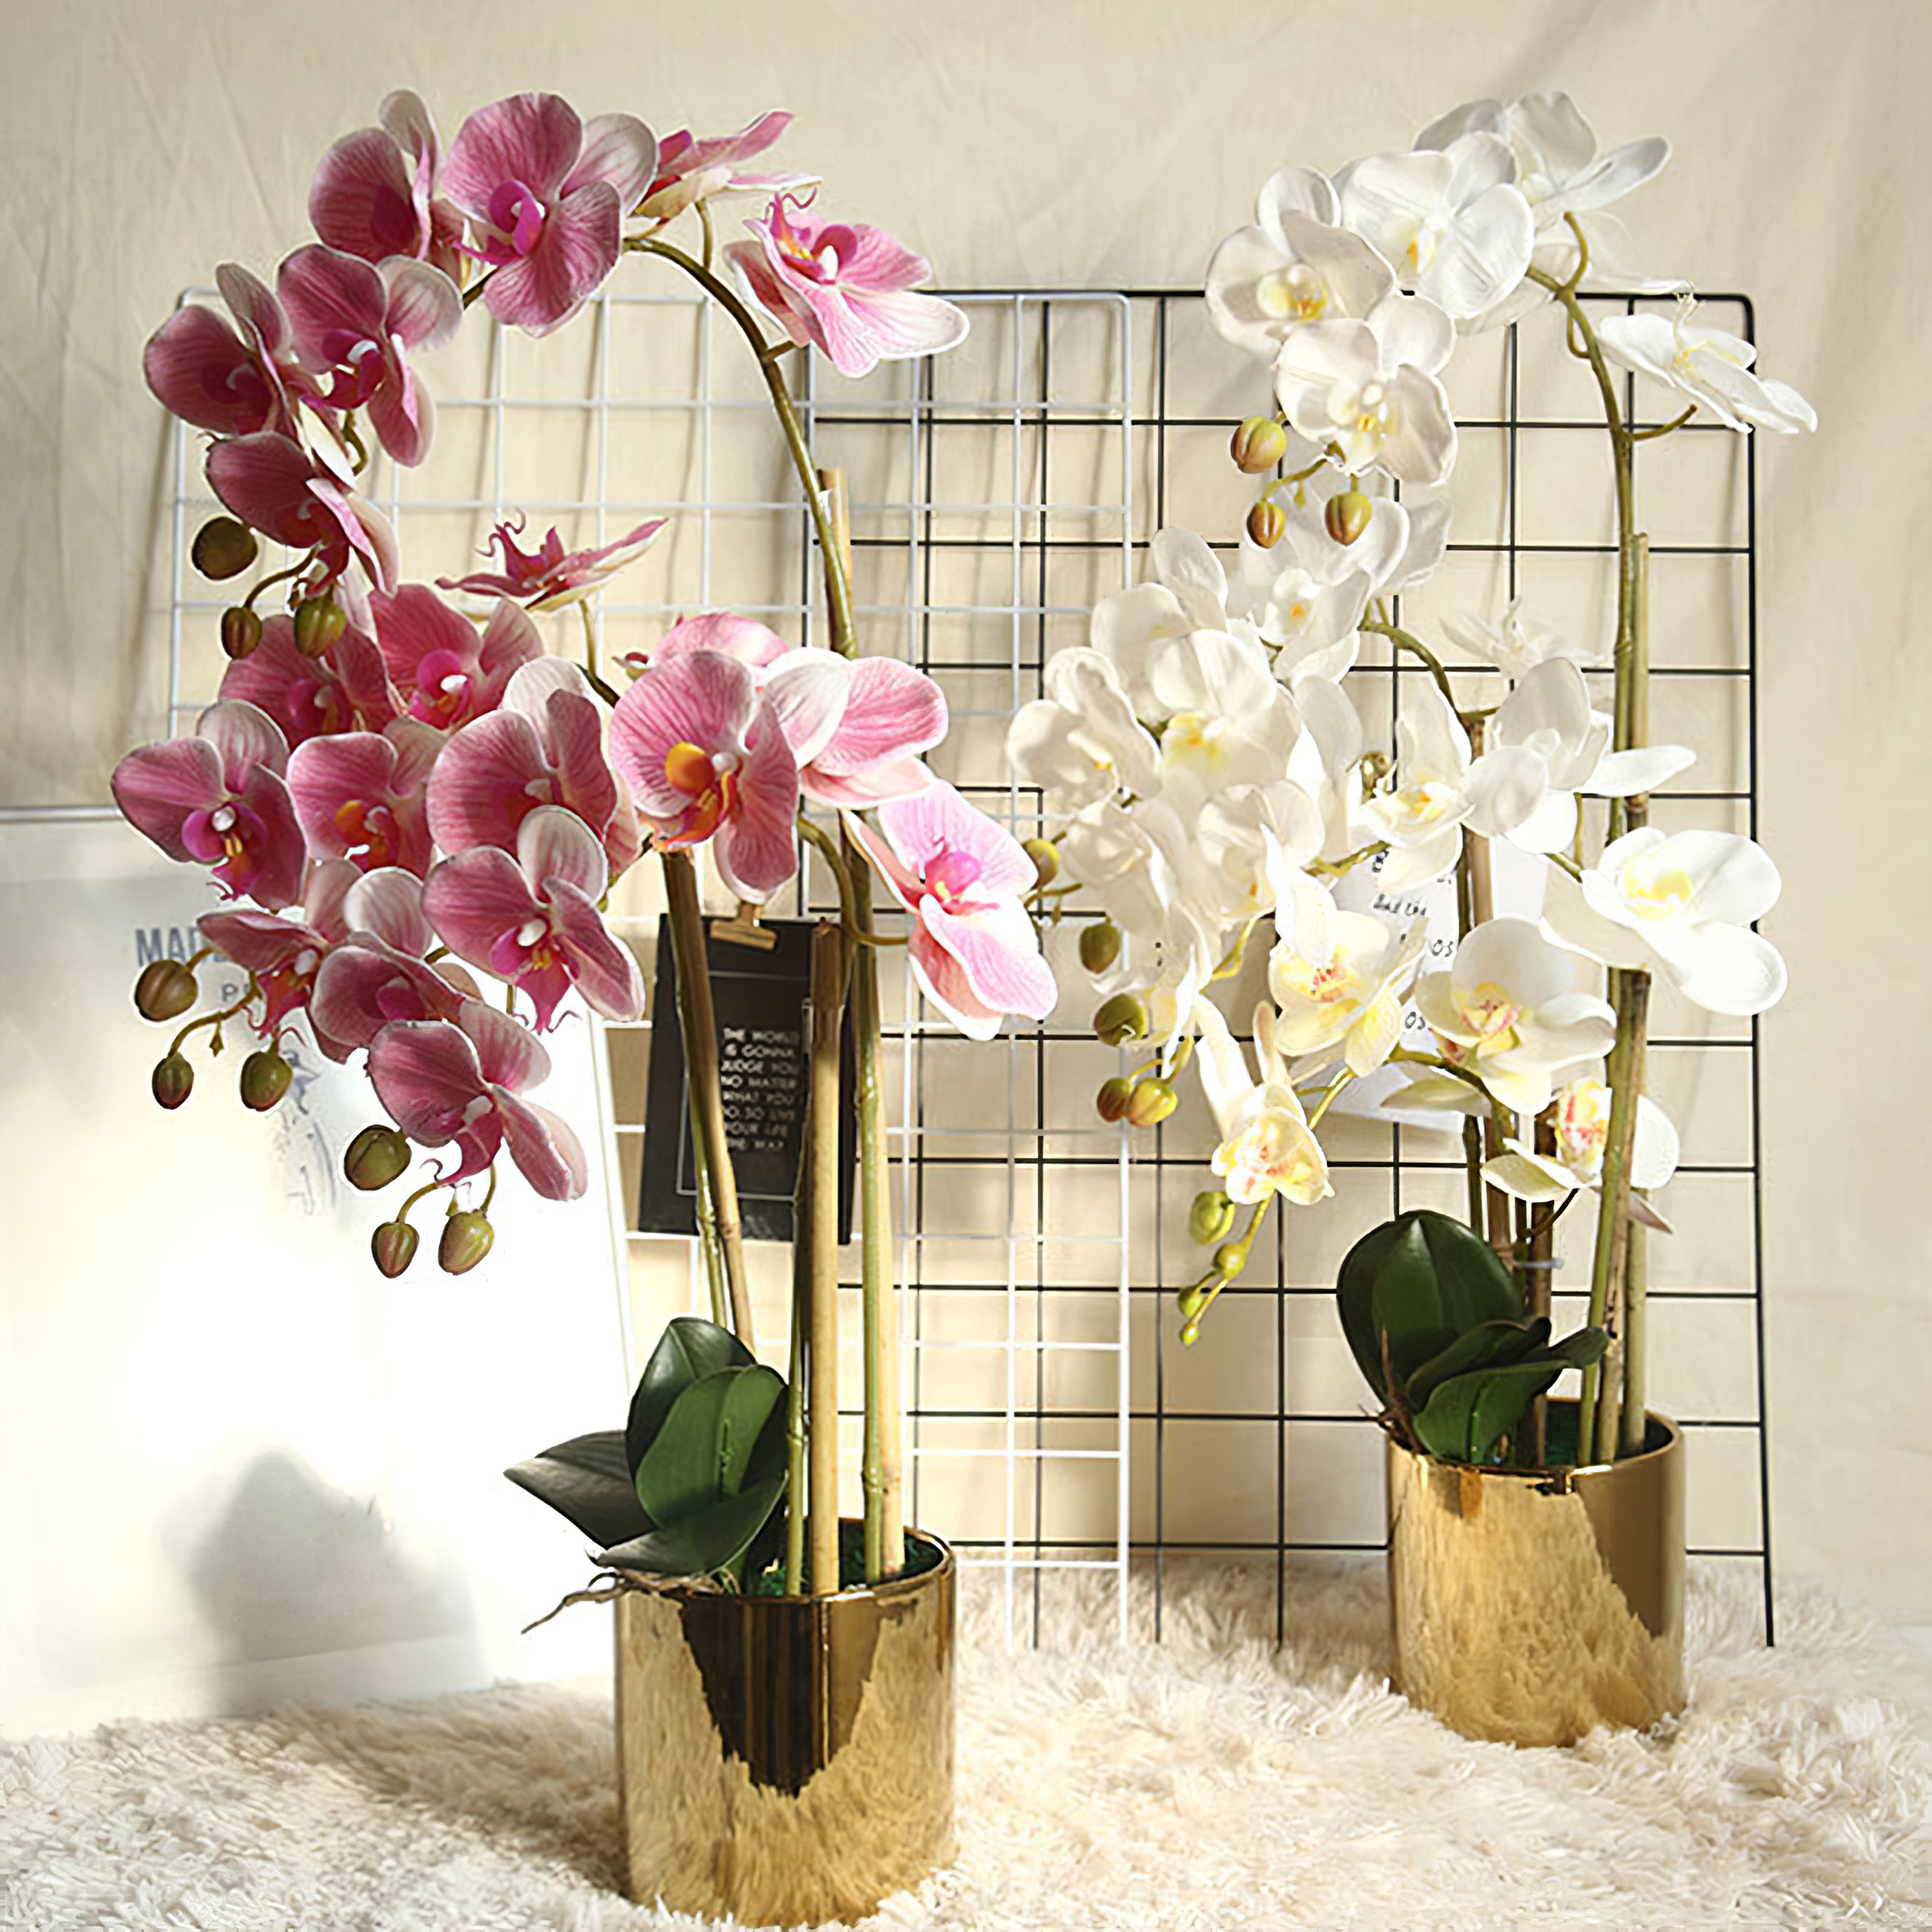 6pcs of Phalaenopsis Series for Wedding Party Home Decor